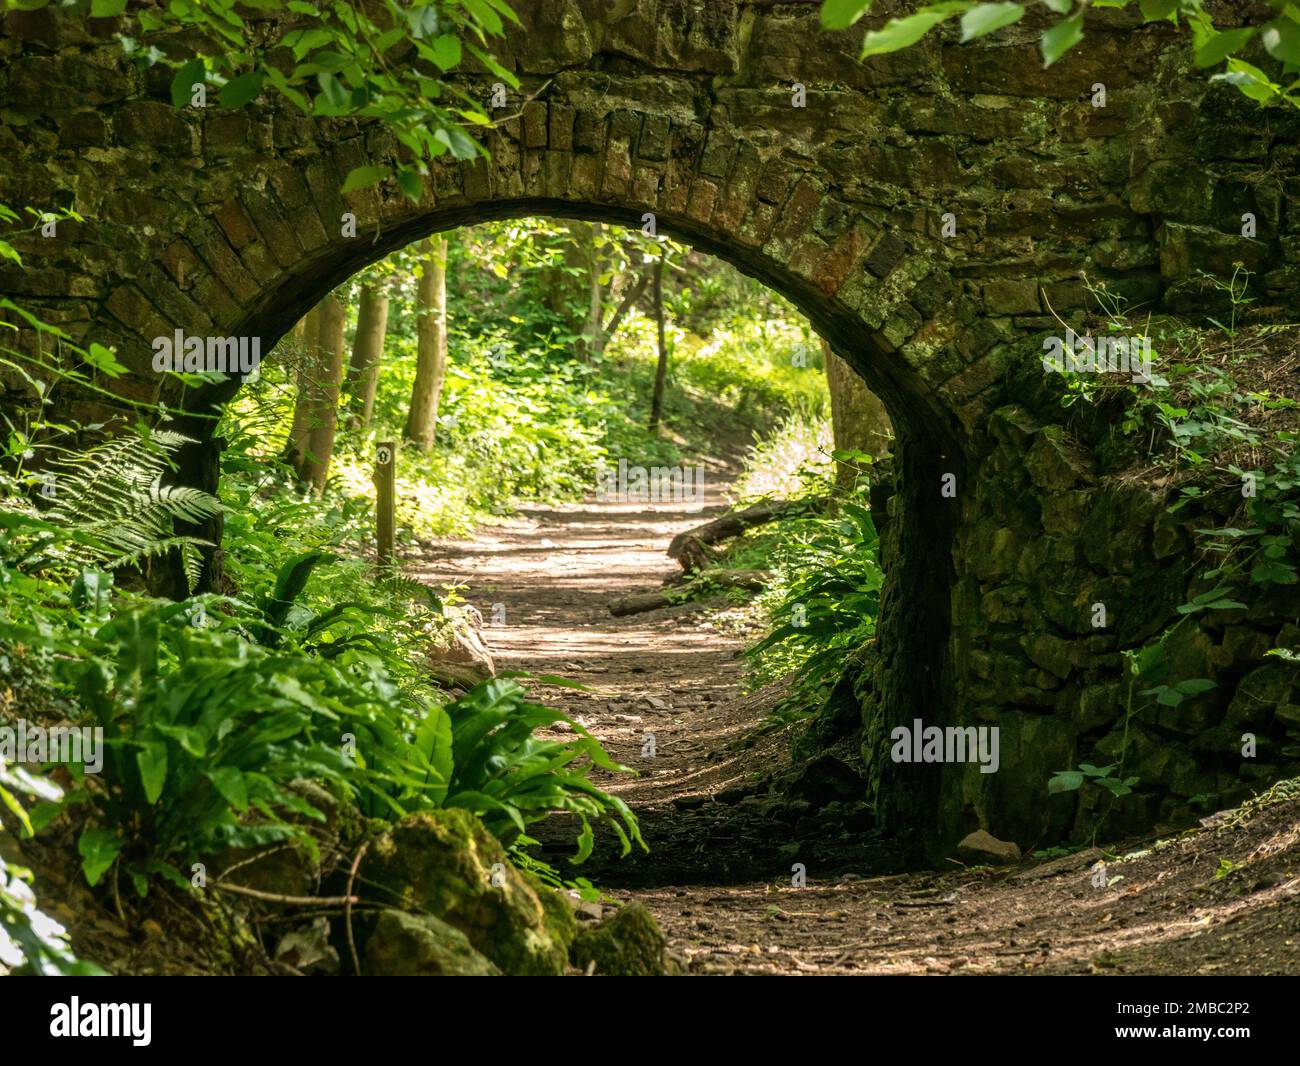 Small, single arch stone and brick bridge over old trackway in Ticknall Limeyards, Derbyshire, England, UK. Stock Photo